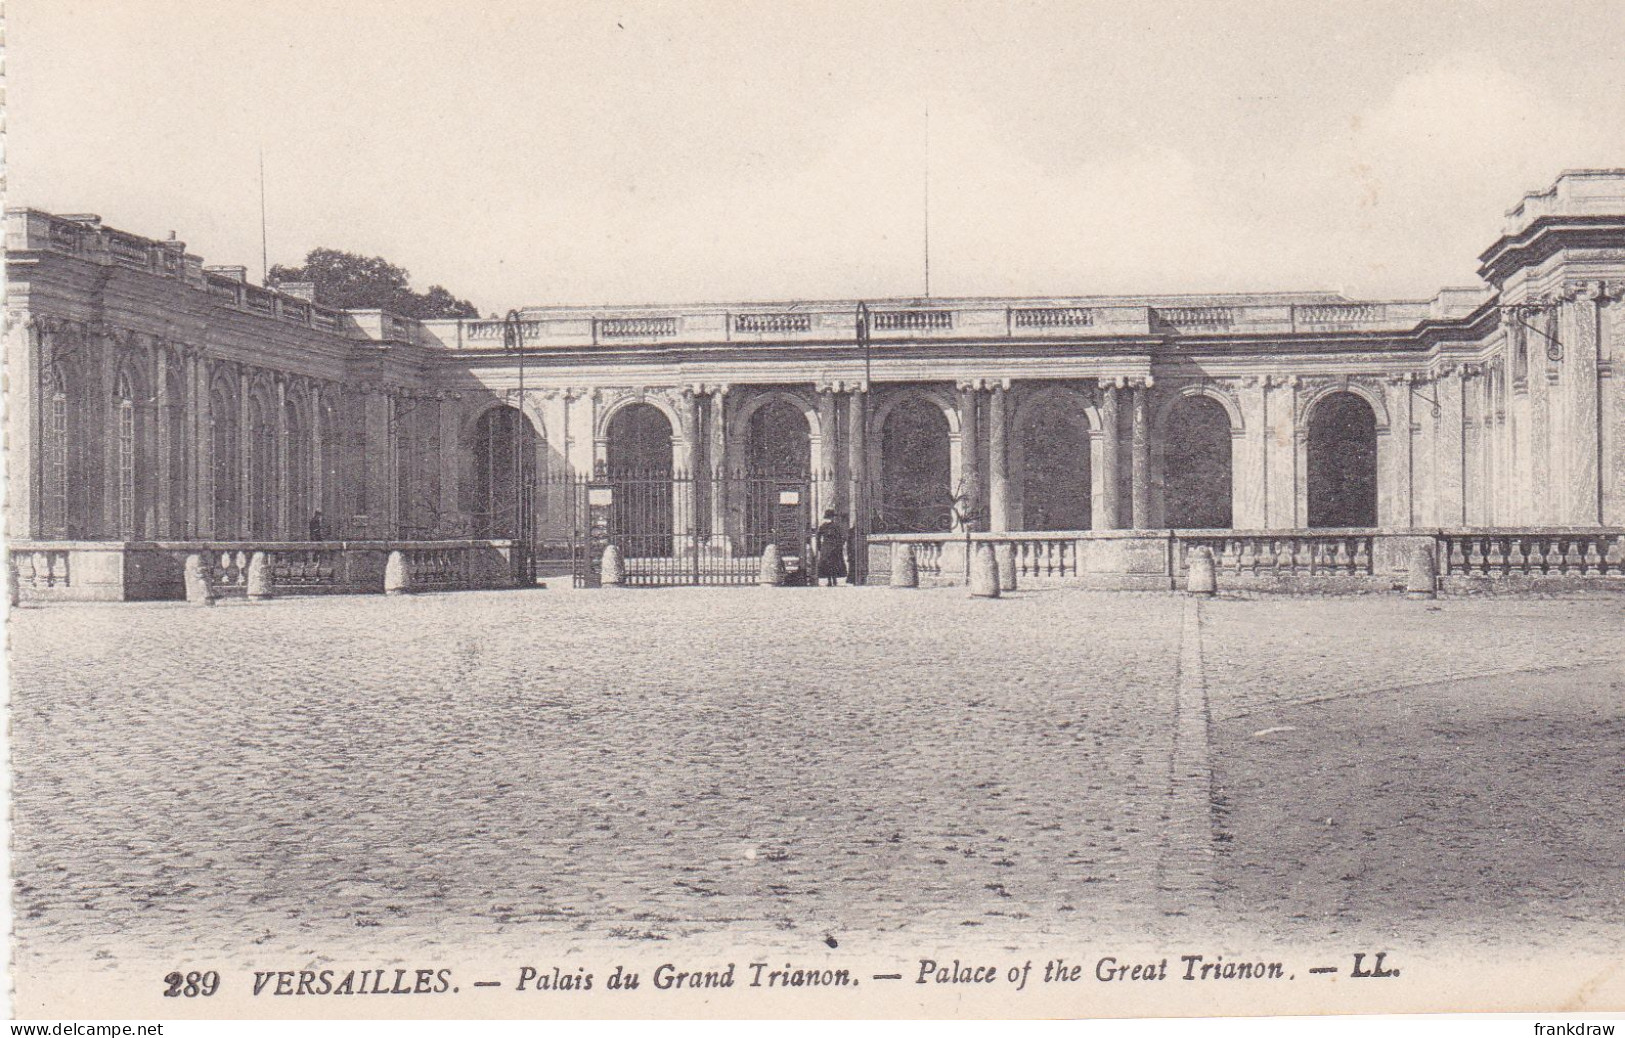 Postcard - Versailles - Palais Du Grand Trianon - Palce Of The Great Trianon - Card No. 289 - VG - Unclassified